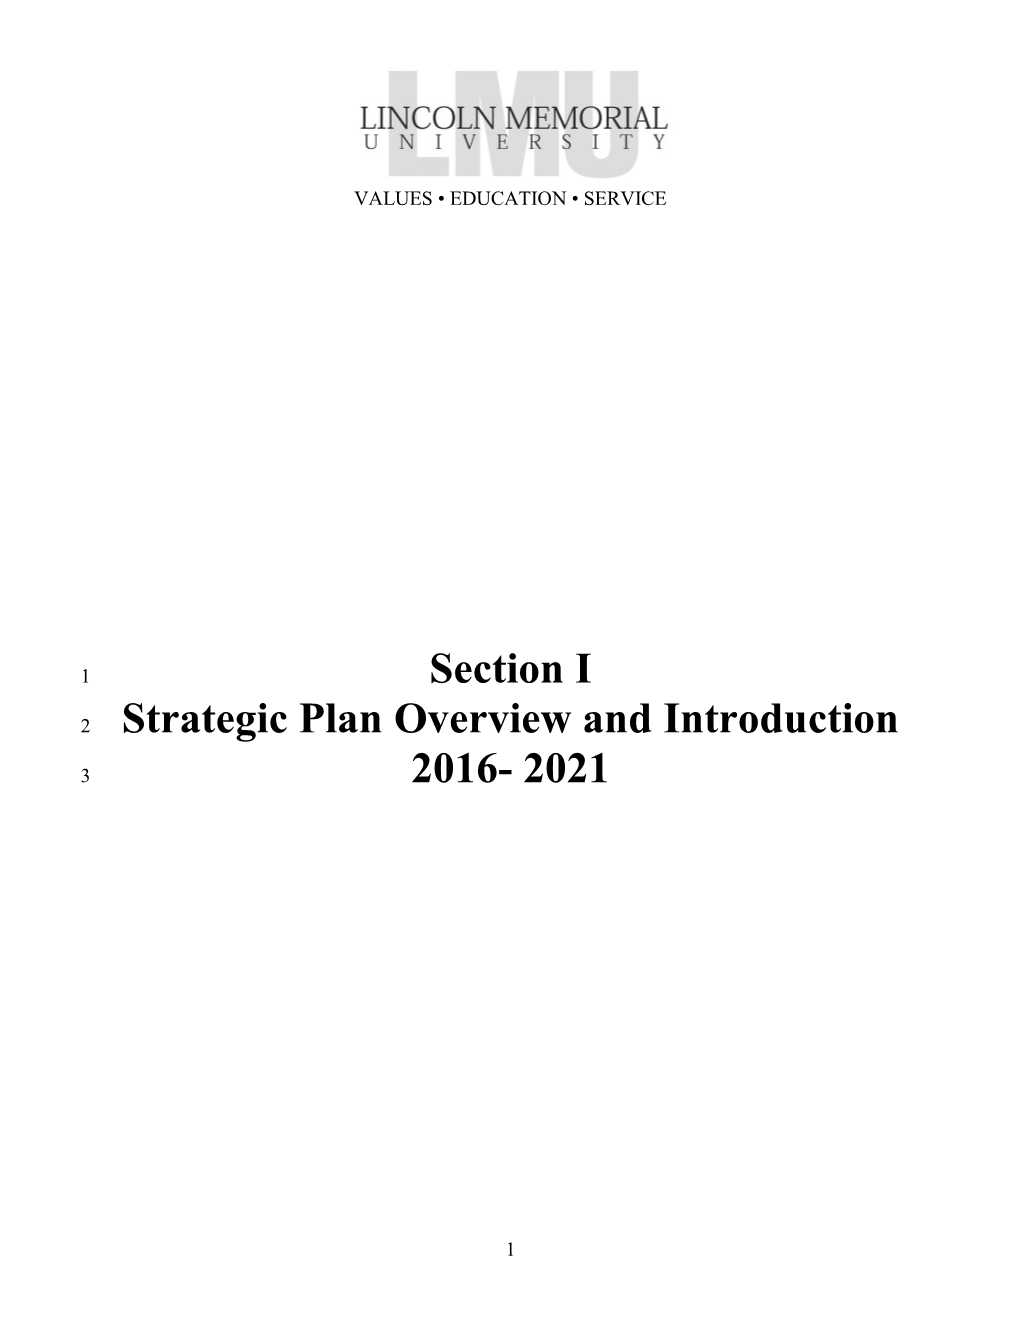 Section I Strategic Plan Overview and Introduction 2016- 2021